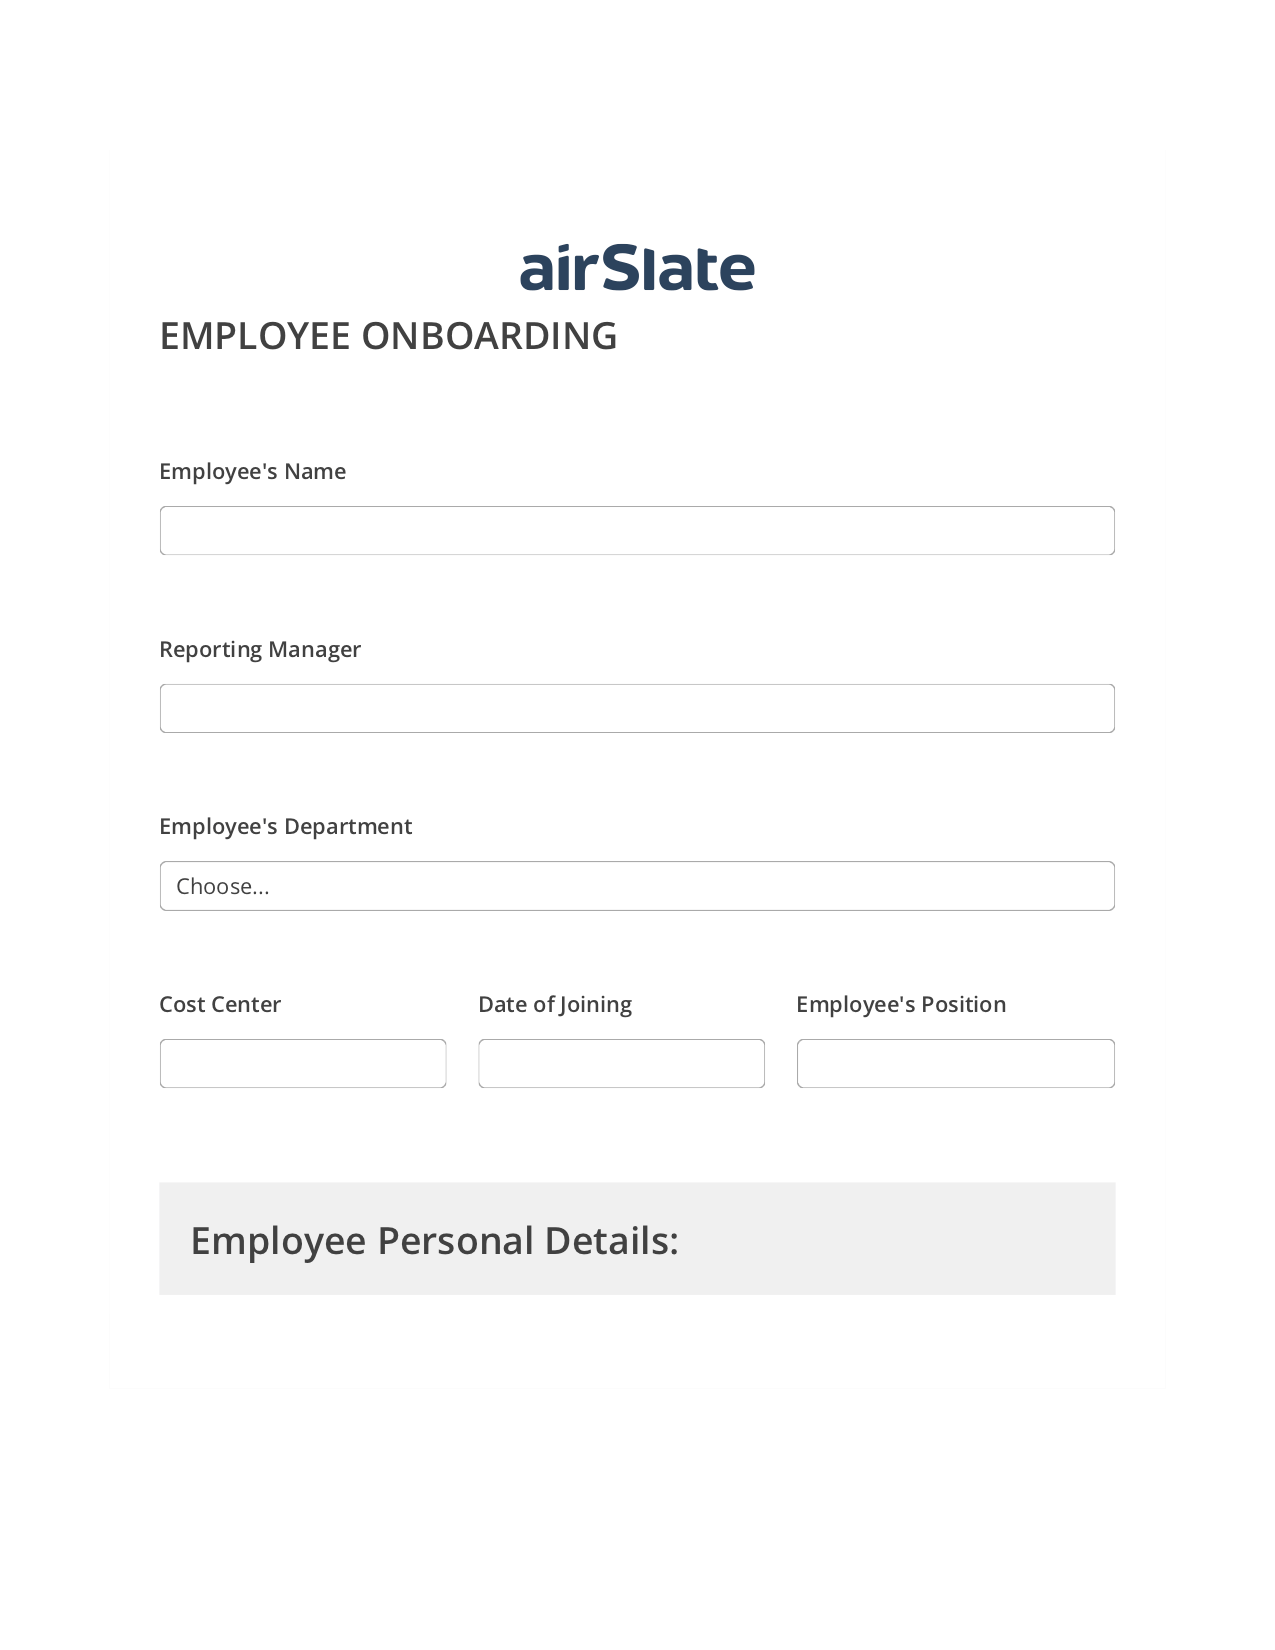 Multirole Employee Onboarding Workflow Pre-fill Slate from MS Dynamics 365 record, Google Cloud Print Bot, Export to Excel 365 Bot